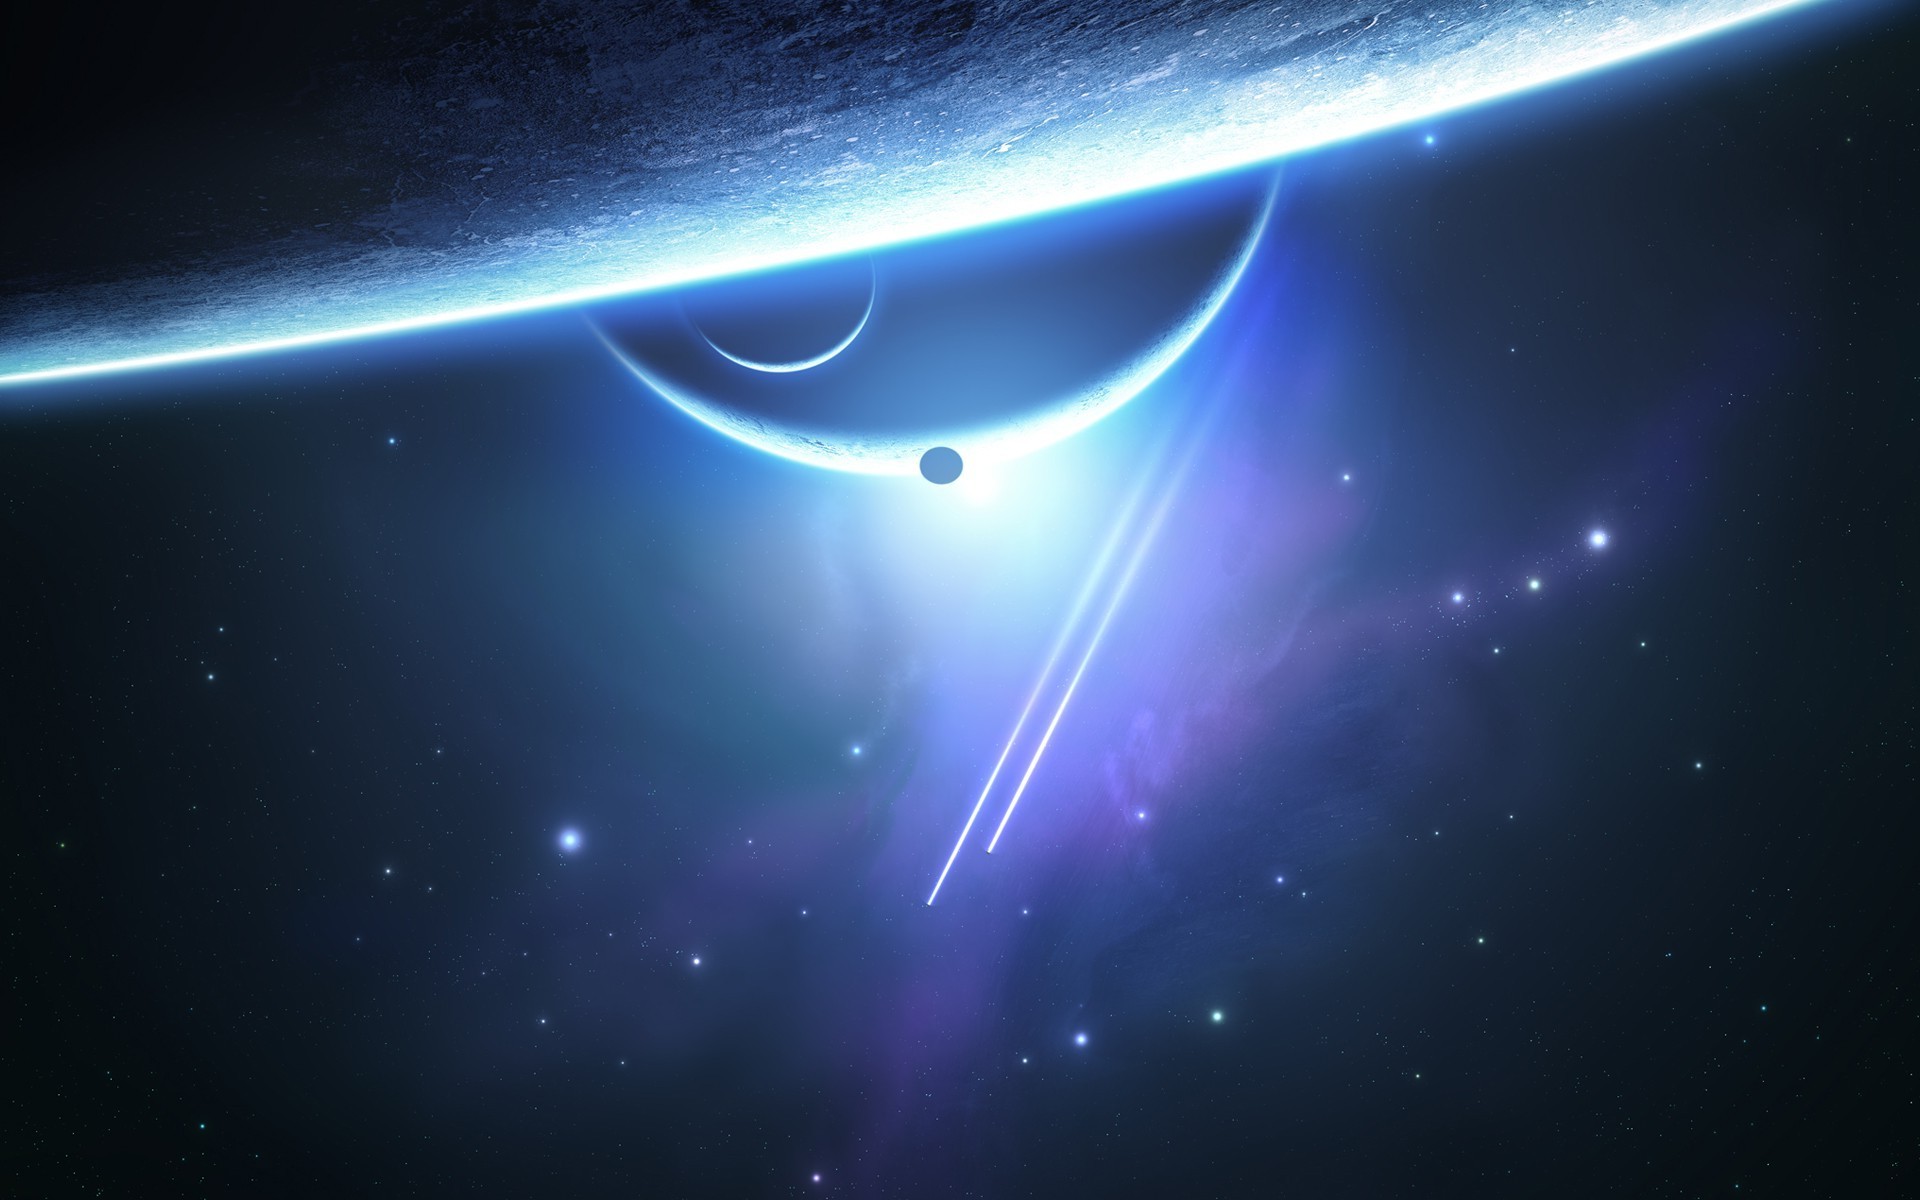 Space Star Mobile Wallpapers